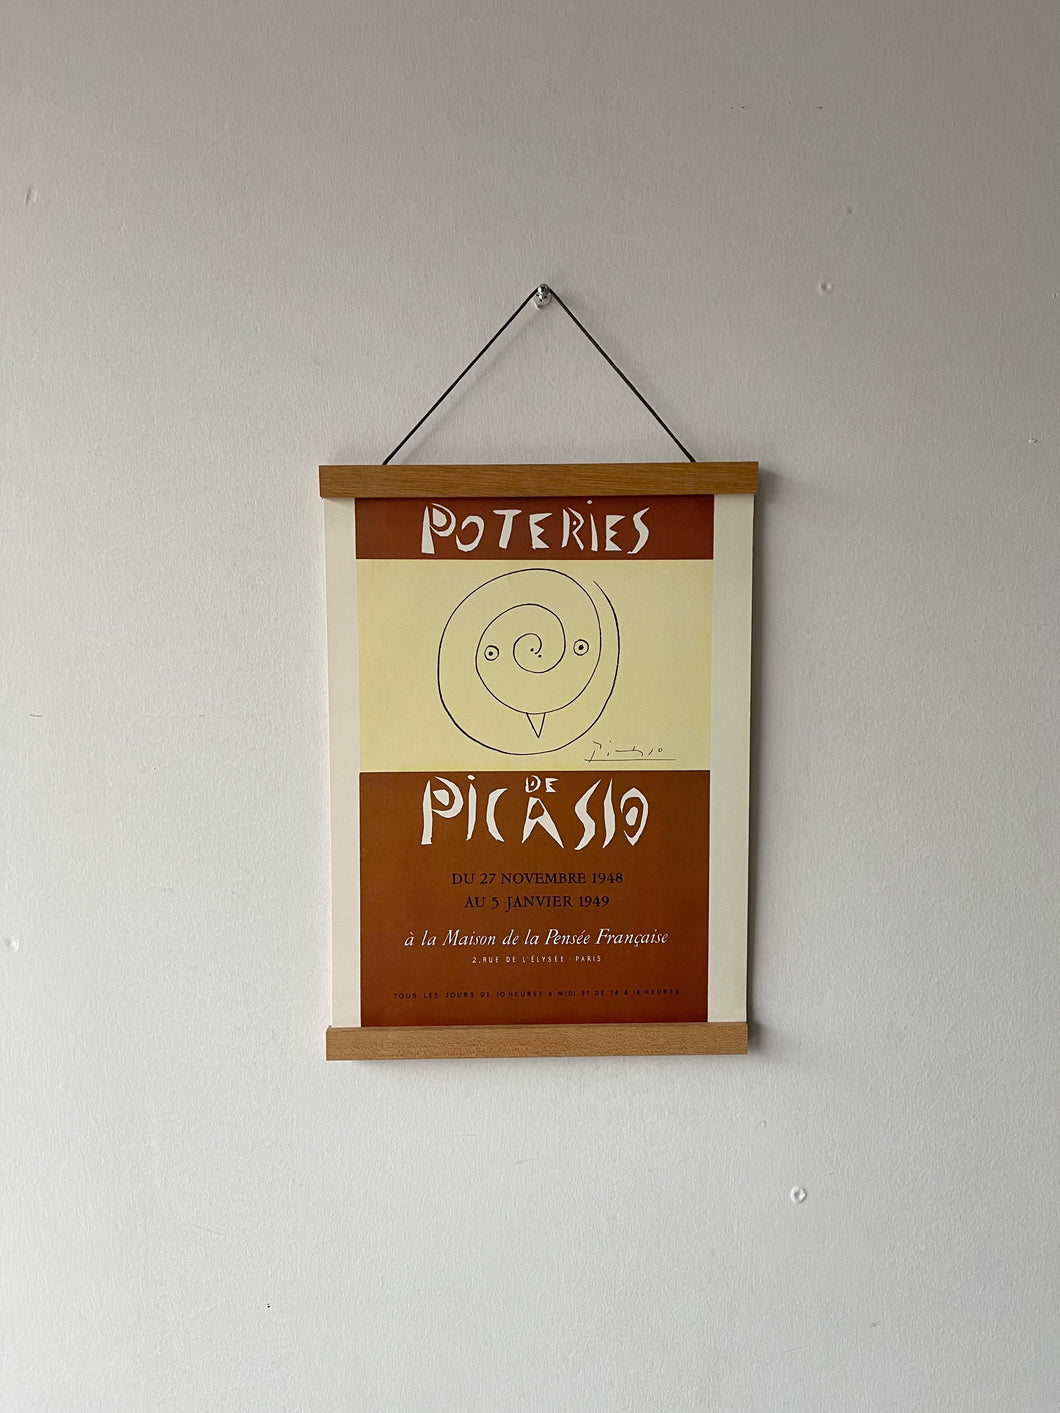 Picasso Poteries exposition poster